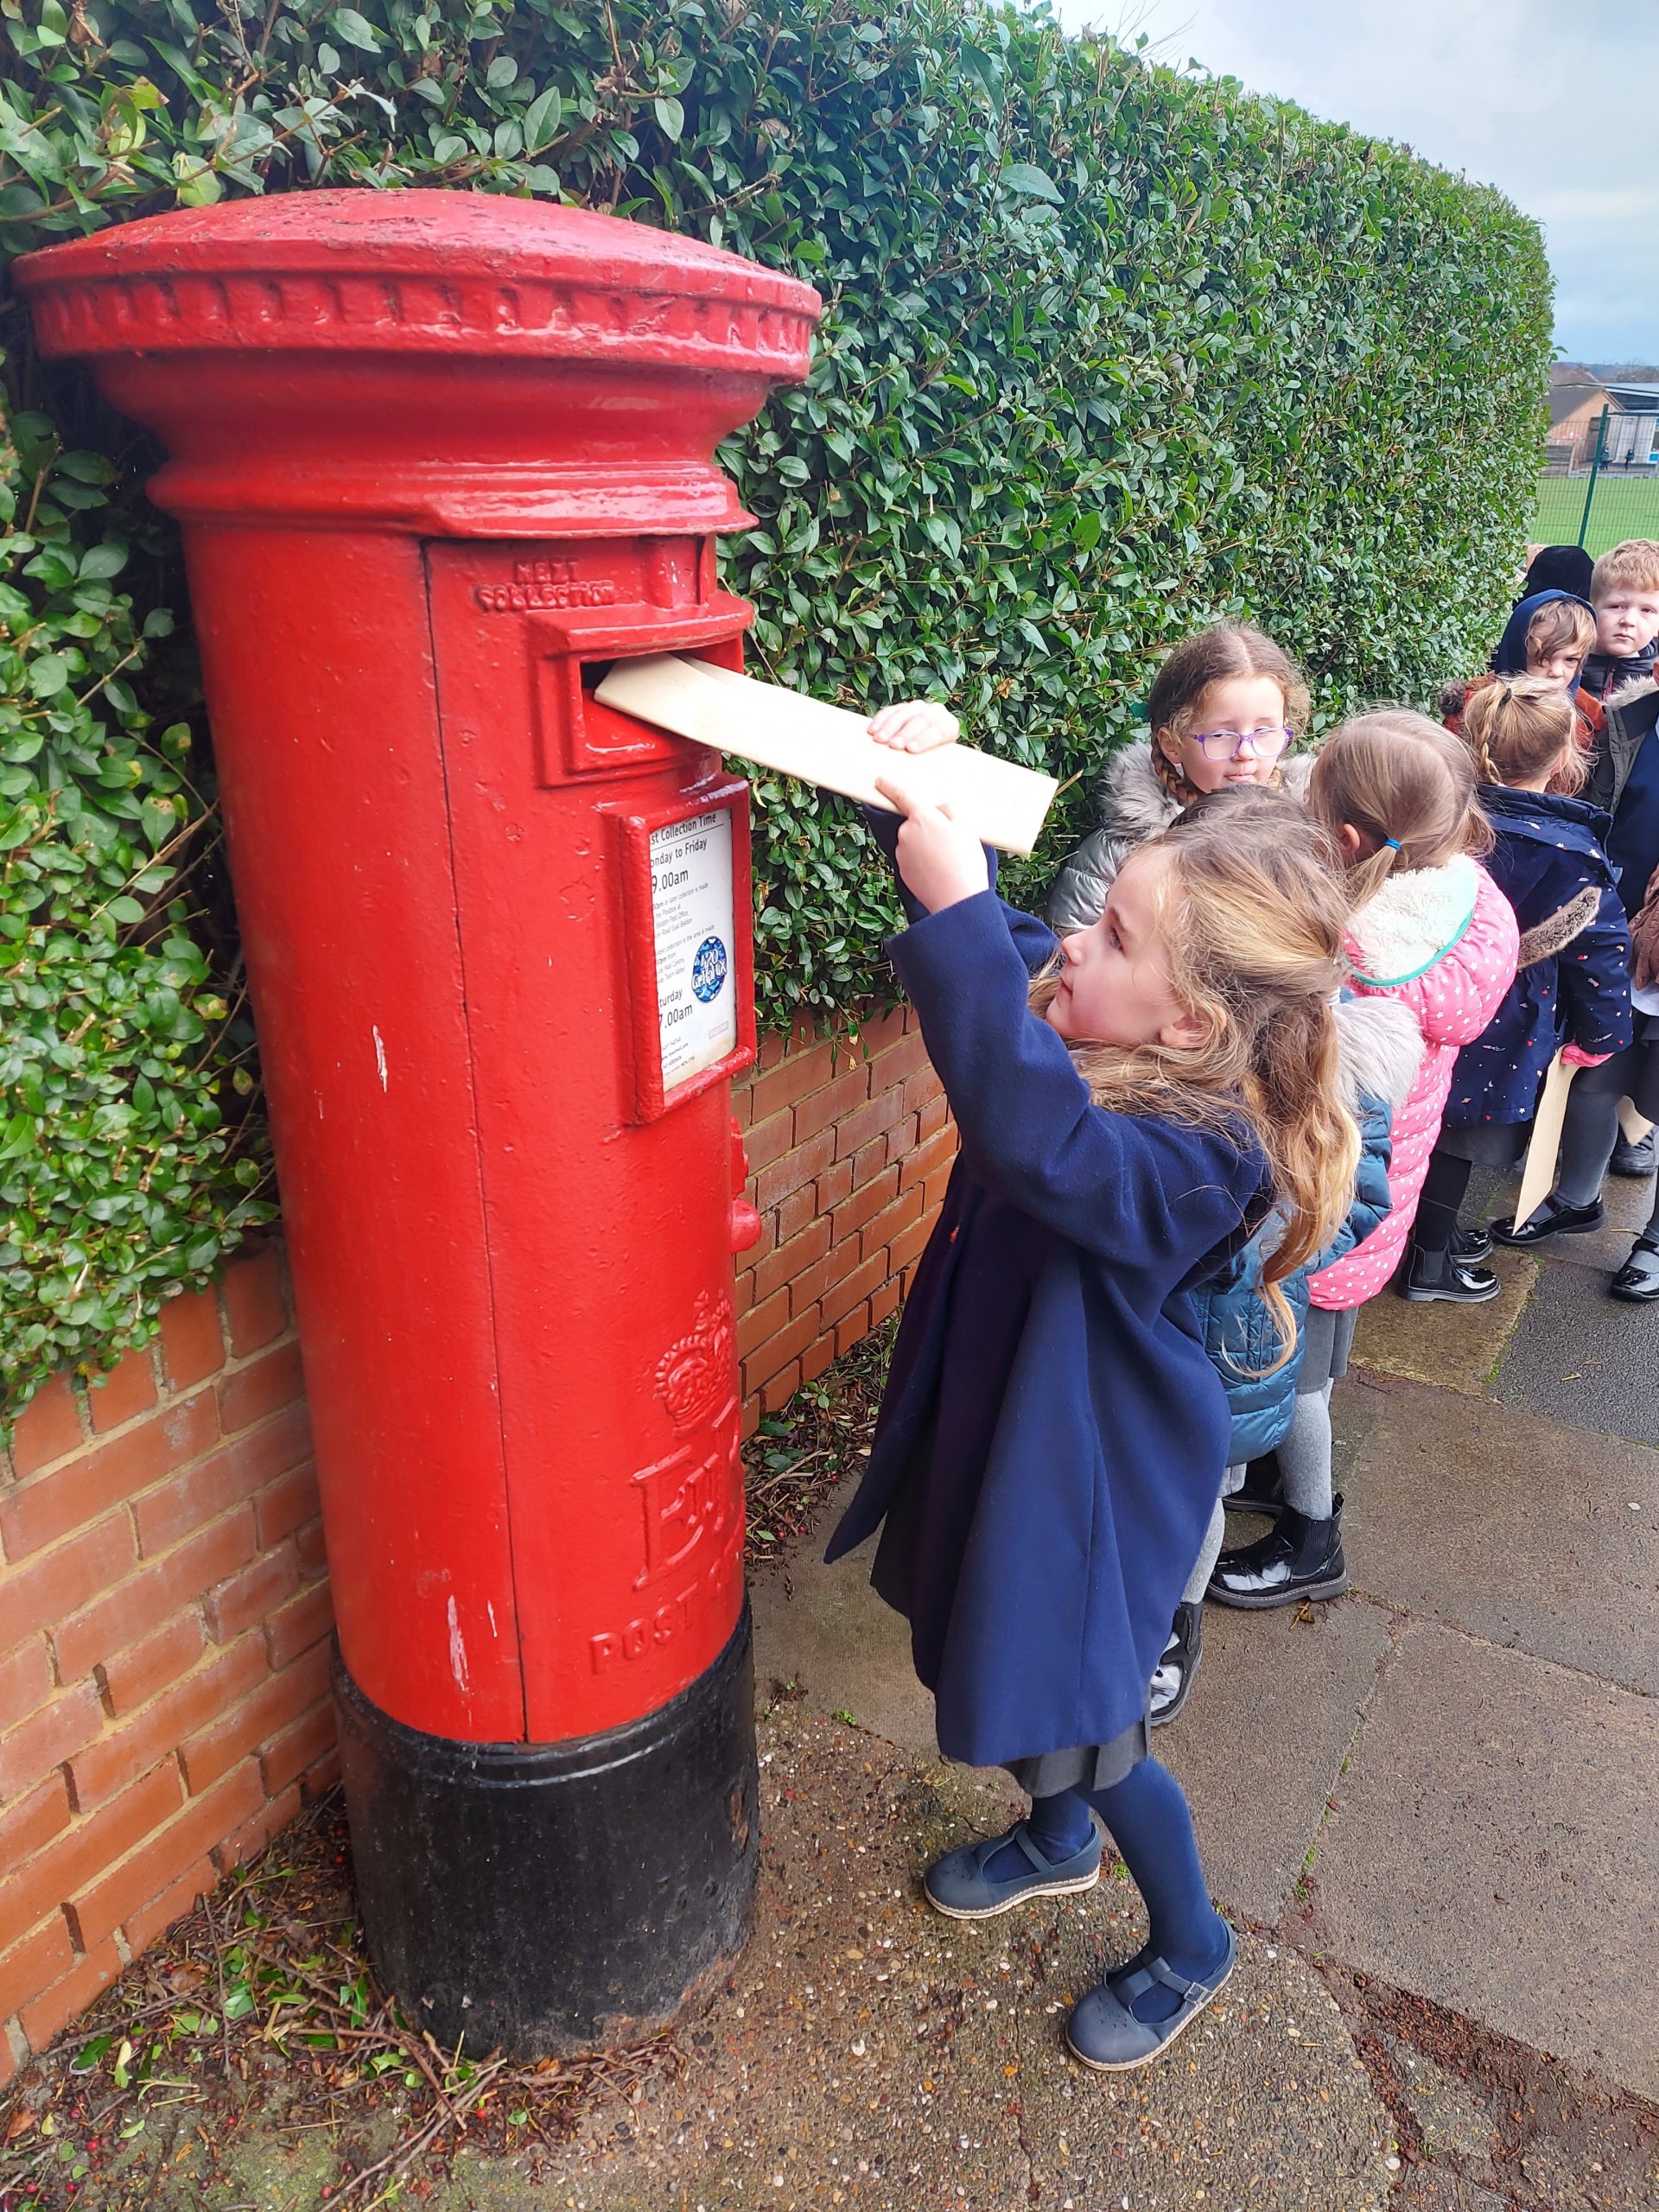 Year 1 children walking to the post box to post their letters to Santa Claus